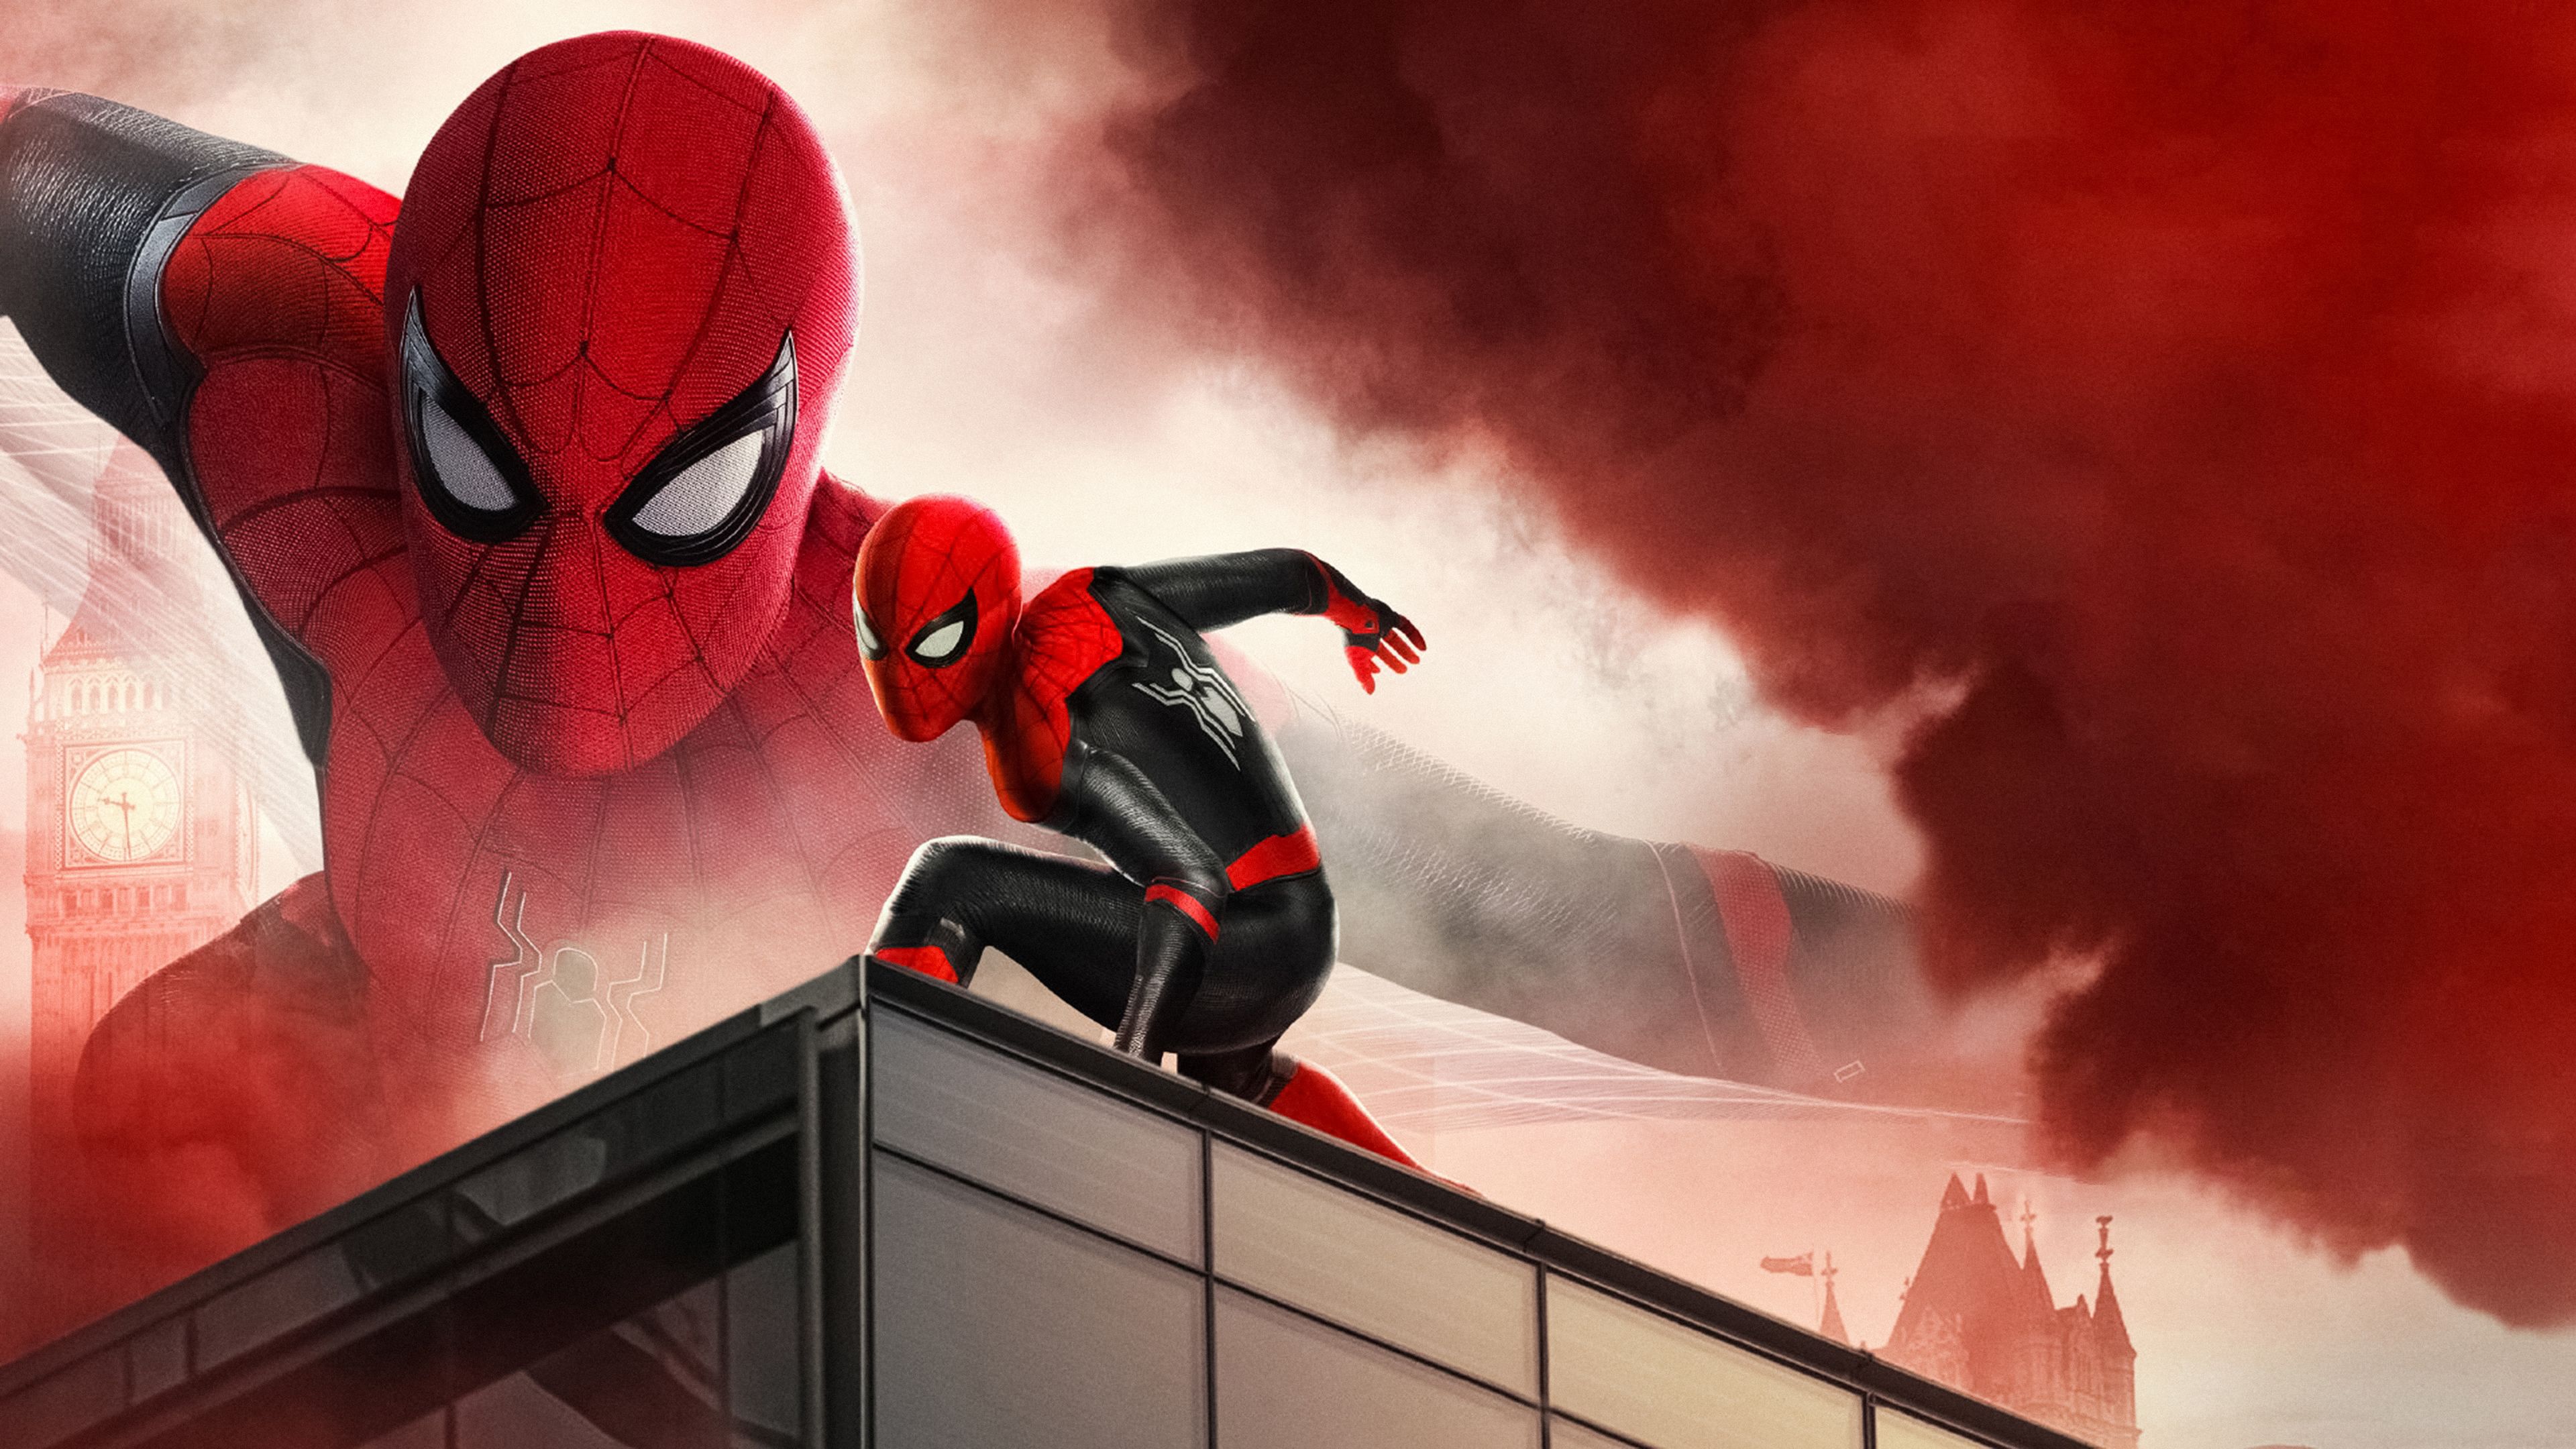 Wallpaper 4k Spider Man Far Fromhome 2019 Movies Wallpaper, 4k Wallpaper, Hd Wallpaper, Movies Wallpaper, Spiderman Far From Home Wallpaper, Spiderman Wallpaper, Superheroes Wallpaper, Tom Holland Wallpaper